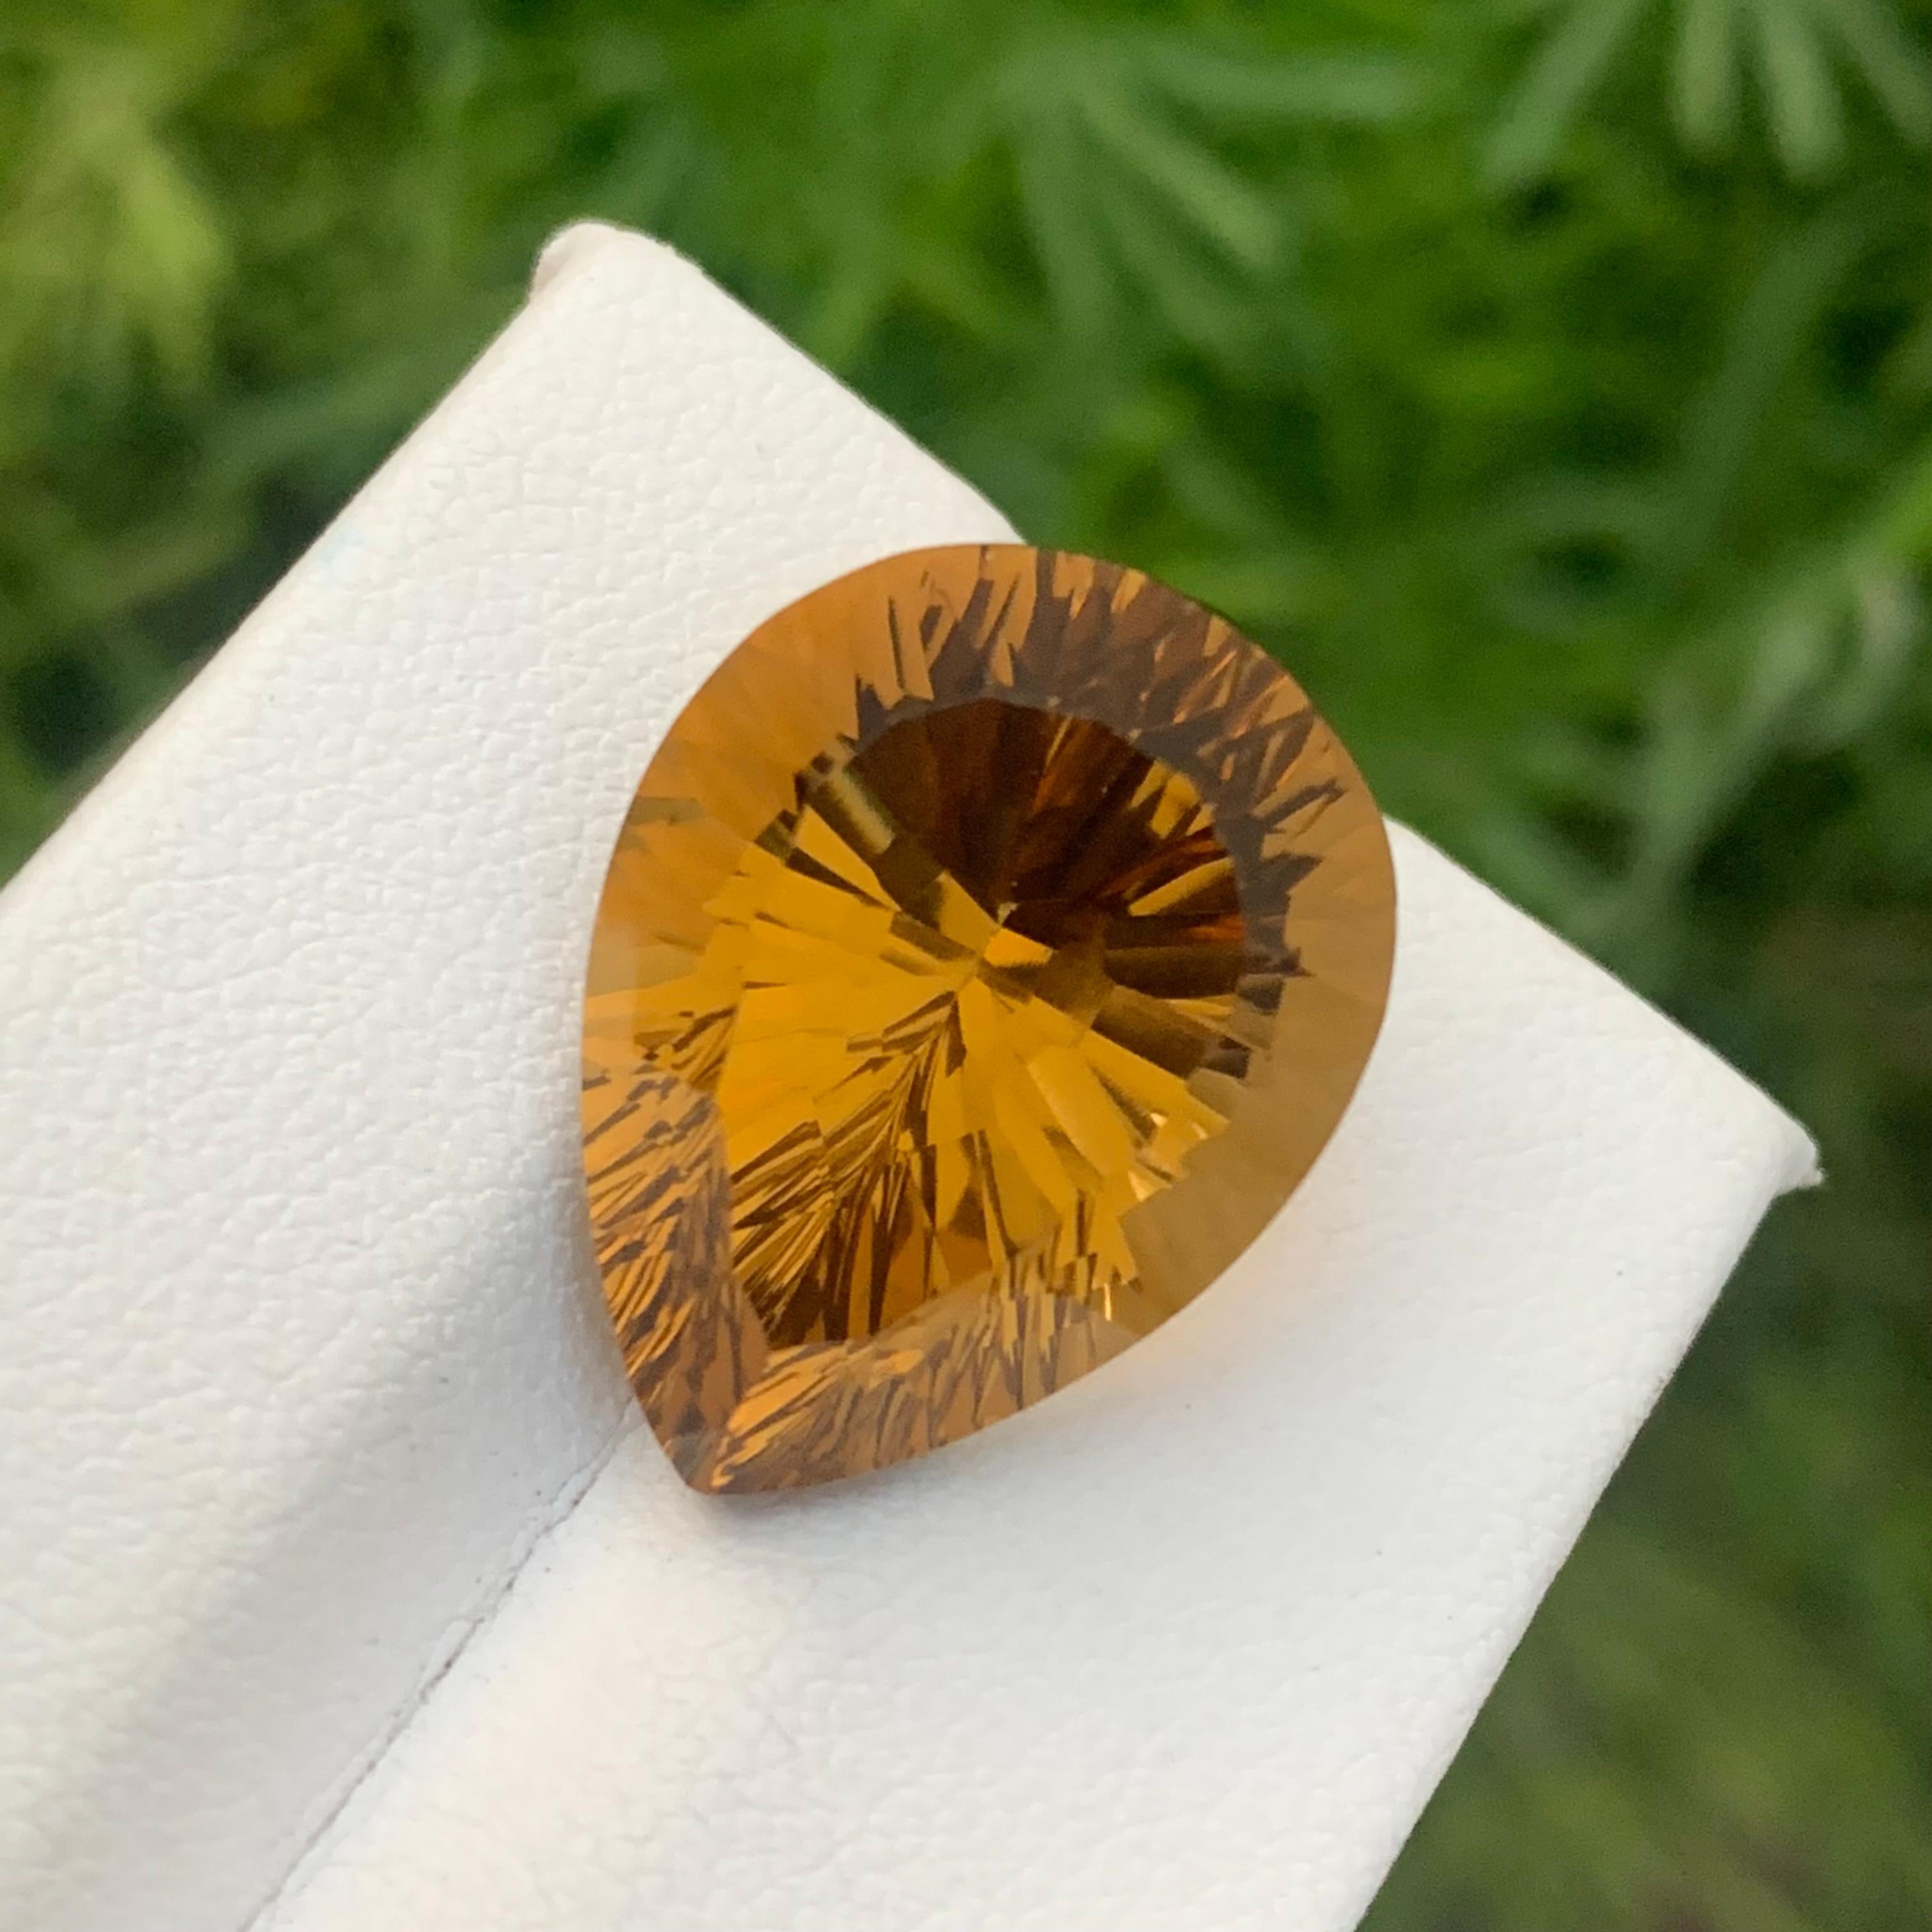 Faceted Yellow Citrine
Weight : 20.45 Carats
Dimensions : 20x15.4x12.9 Mm
Clarity : Eye Clean 
Origin : Brazil
Color: Yellow
Shape: Pear
Cut: Laser
Certificate: On Demand
Month: November
.
The Many Healing Properties of Citrine
Increase Optimism,